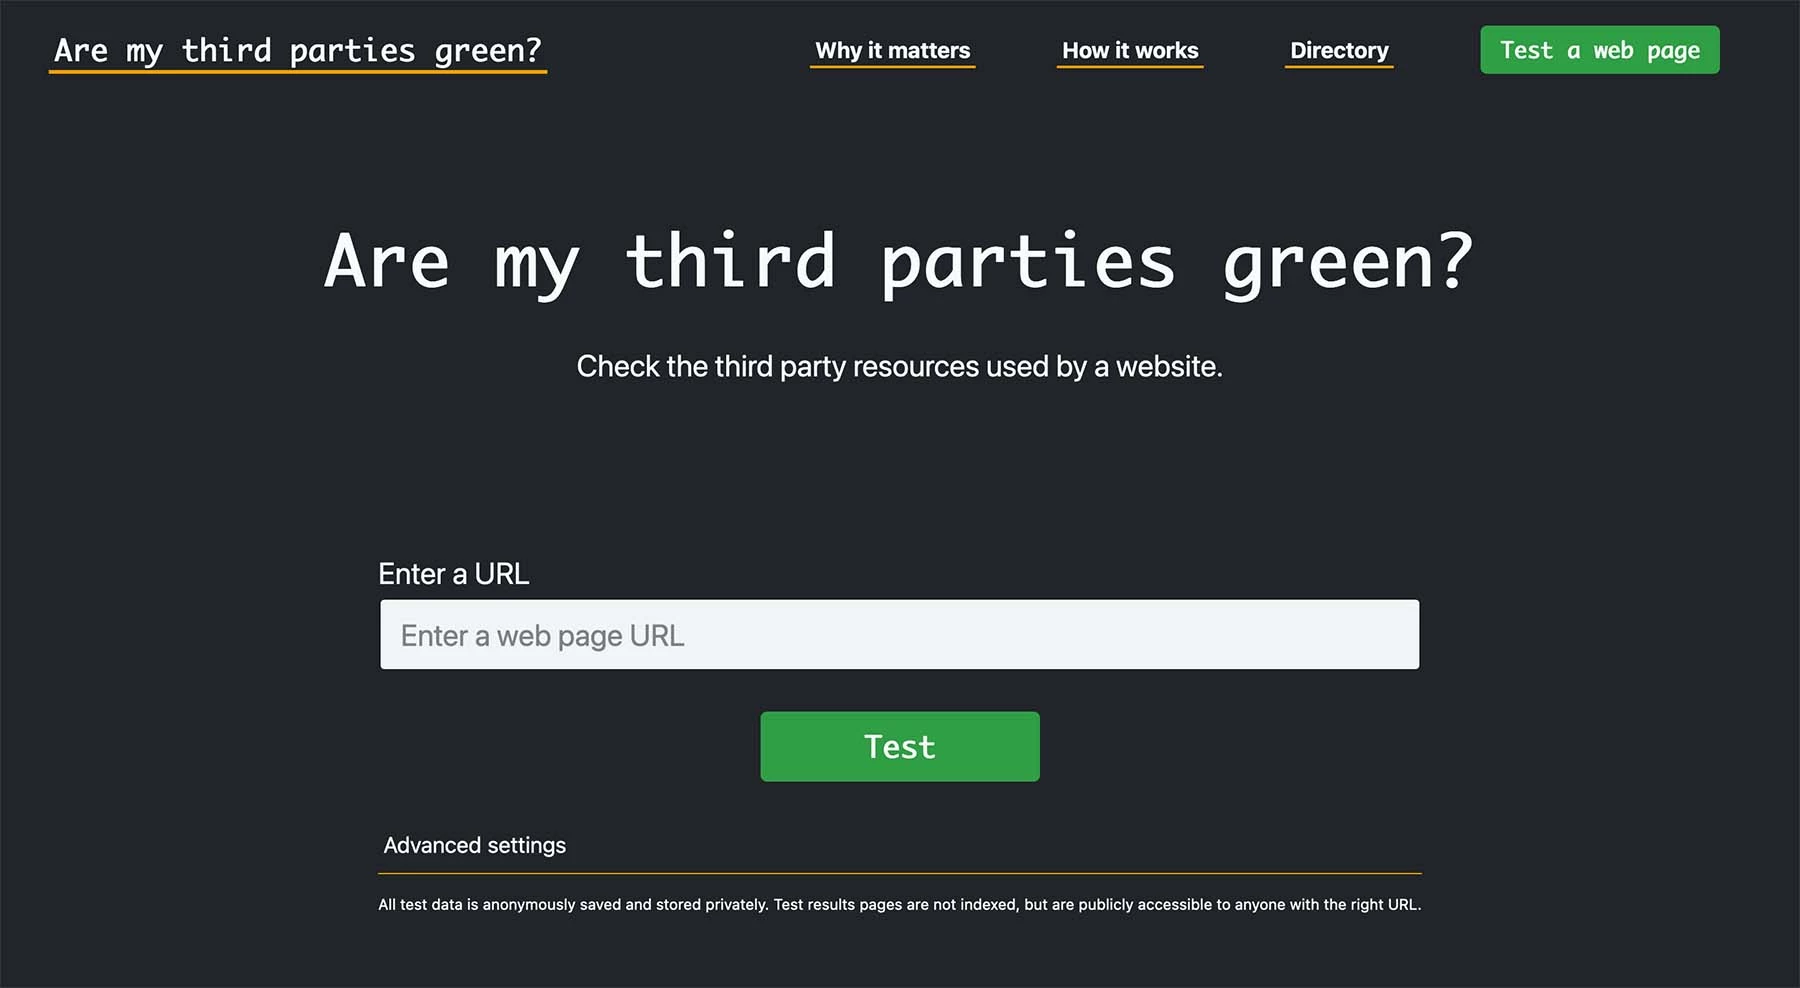 Screenshot of the website “Are My Third Parties Green?”